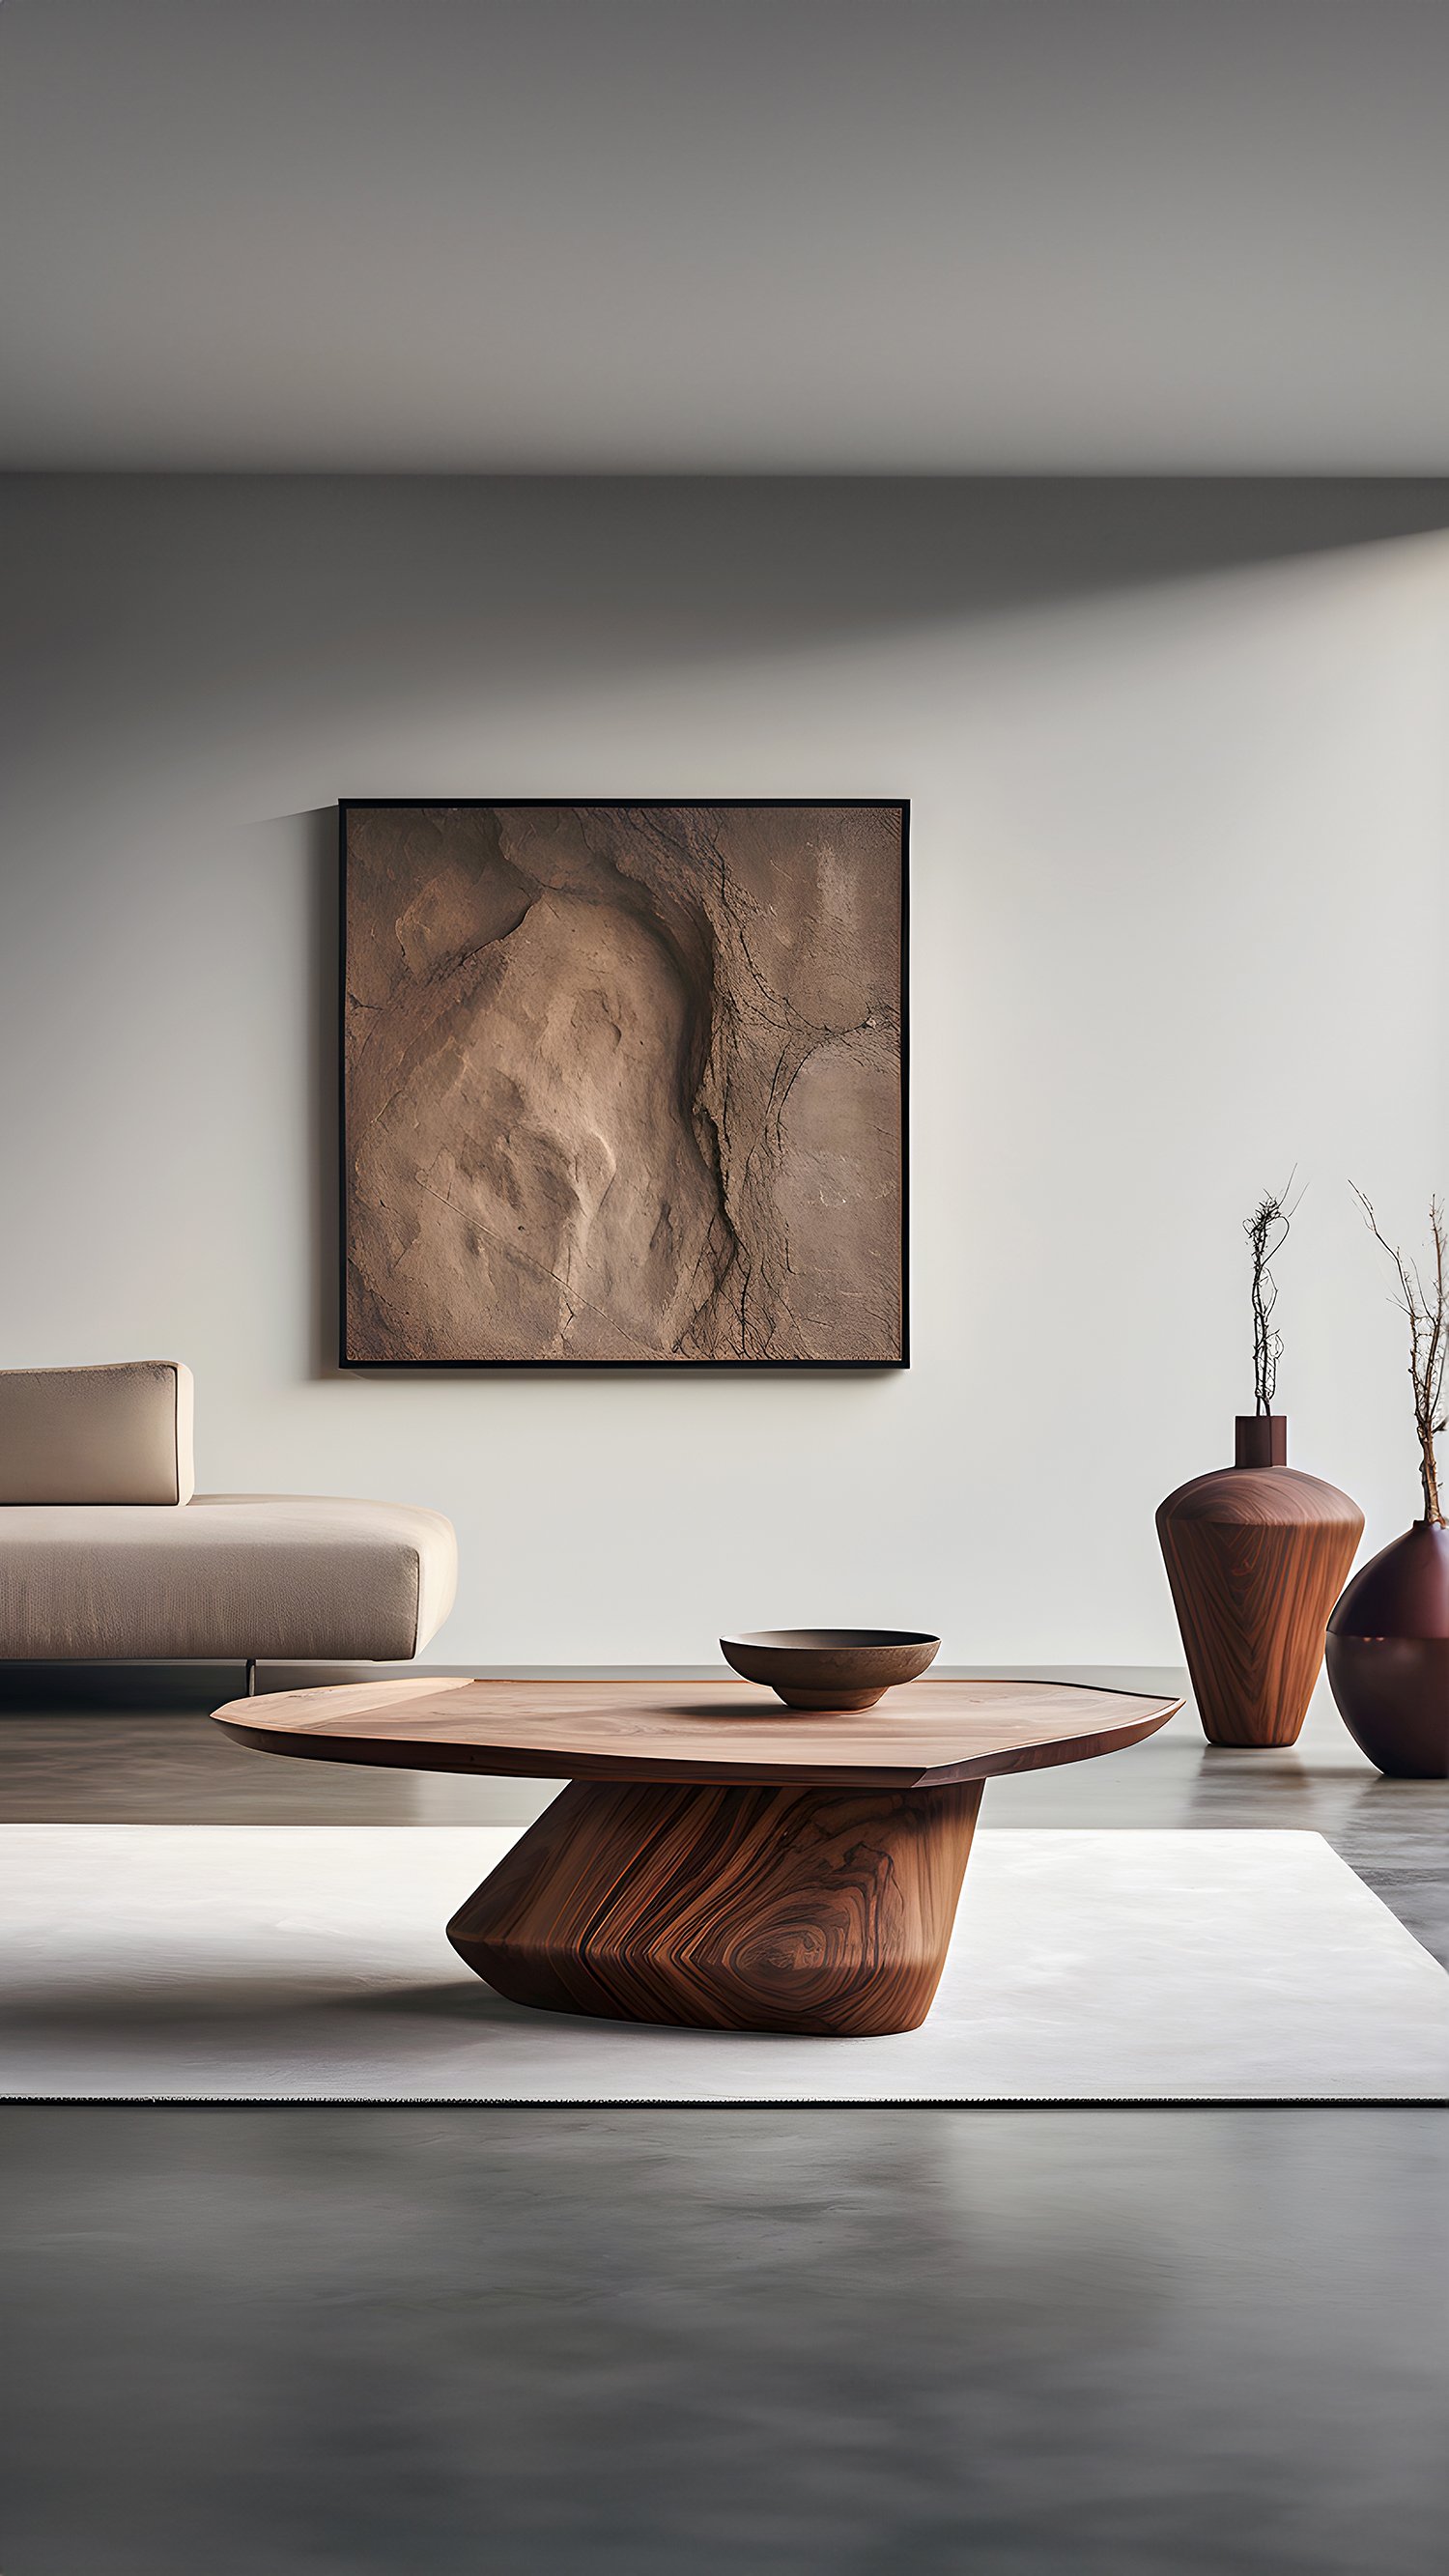 Sculptural Coffee Table Made of Solid Wood, Center Table Solace S32 by Joel Escalona — 7.jpg